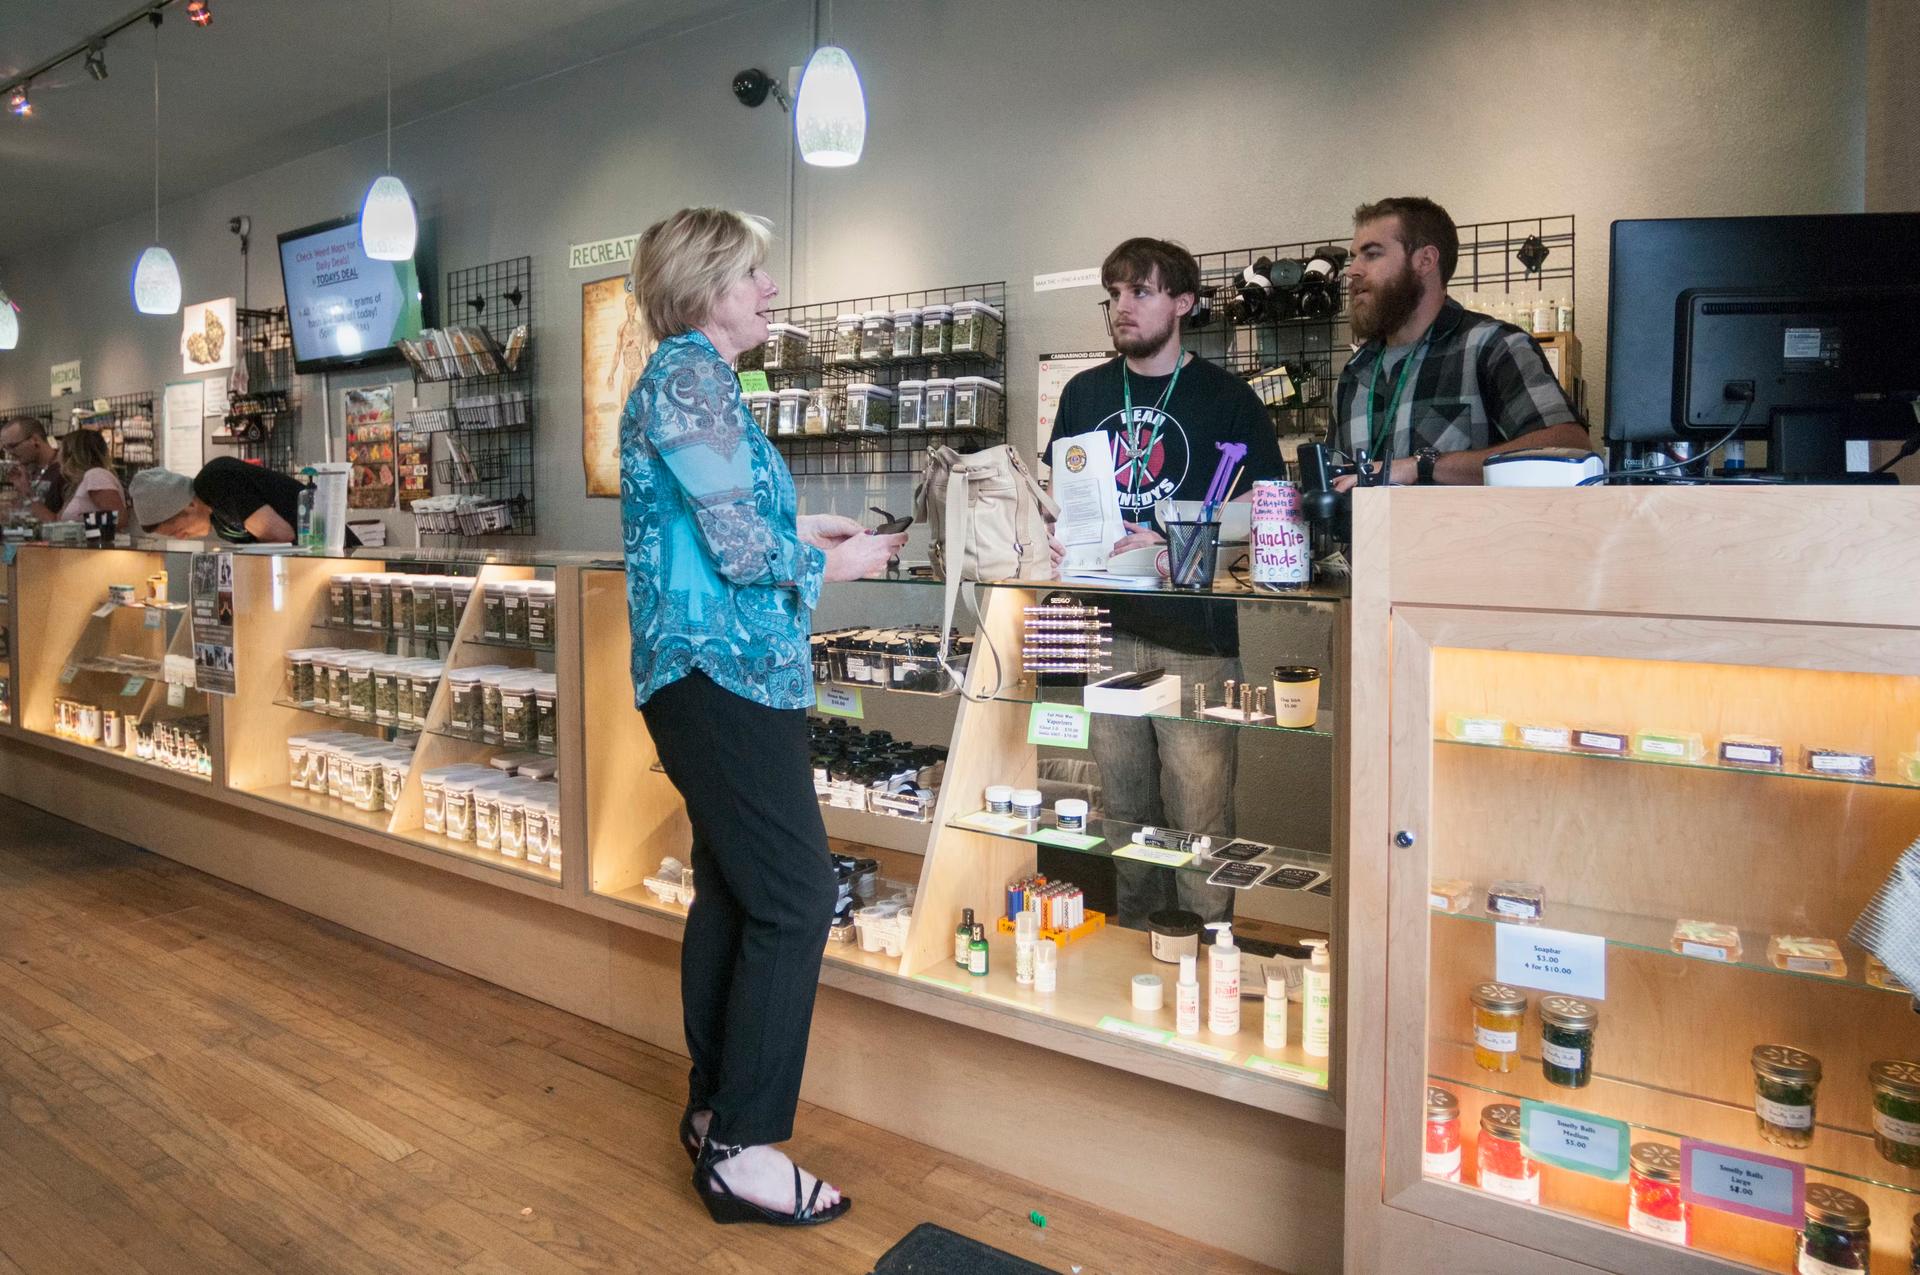 A middle aged white woman with short blond hair in a blue floral tunic, black slacks, and black sandals speaks with two budtenders at a Denver, Colorado cannabis dispensary. A long display case and counter made of blonde wood and glass shows cases a variety of edible and topical cannabis products and concentrates, while jars of flower sit on shelves on the wall